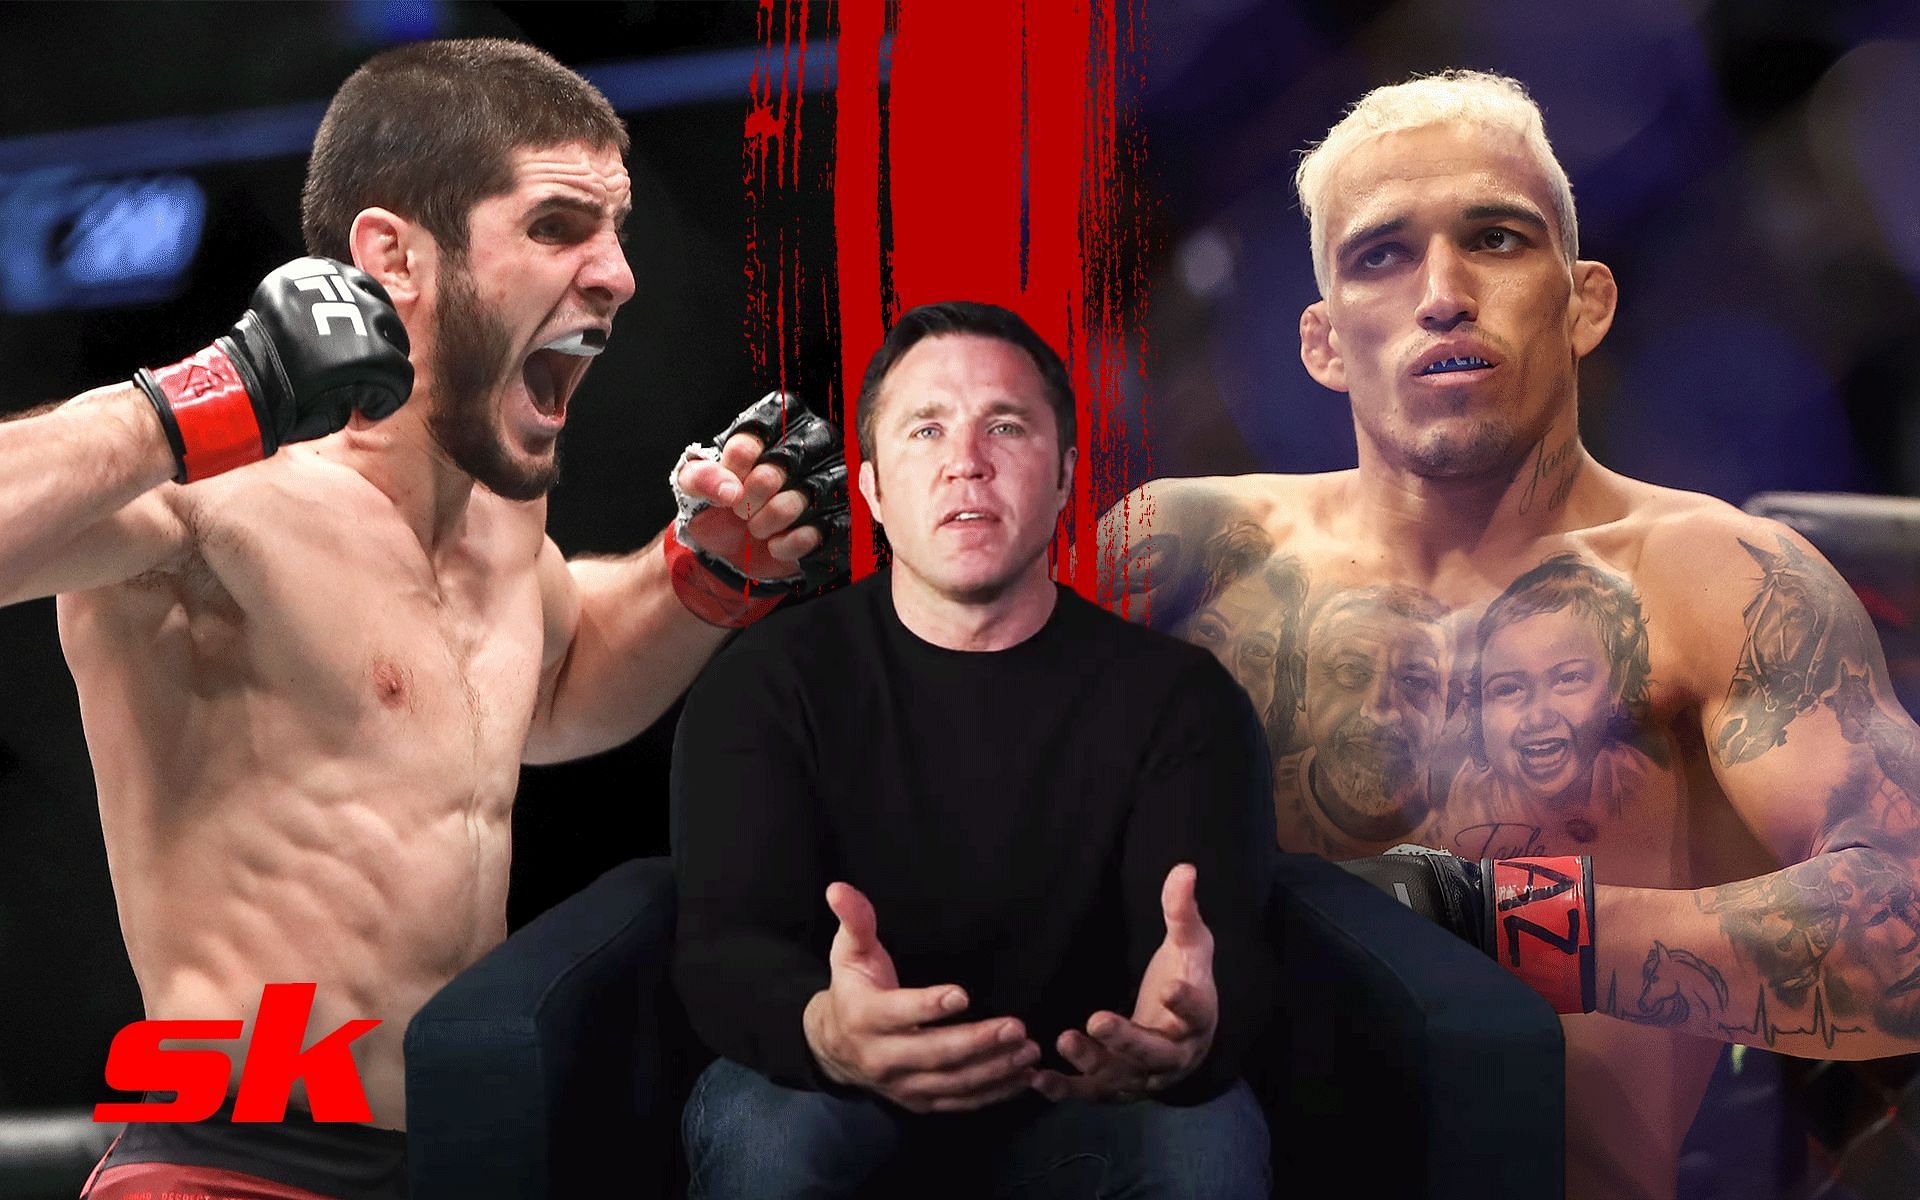 Islam Makhachev (Left), Chael Sonnen (Middle), Charles Oliveira (Right) [Image courtesy: Getty and @Chael Sonnen on YouTube]